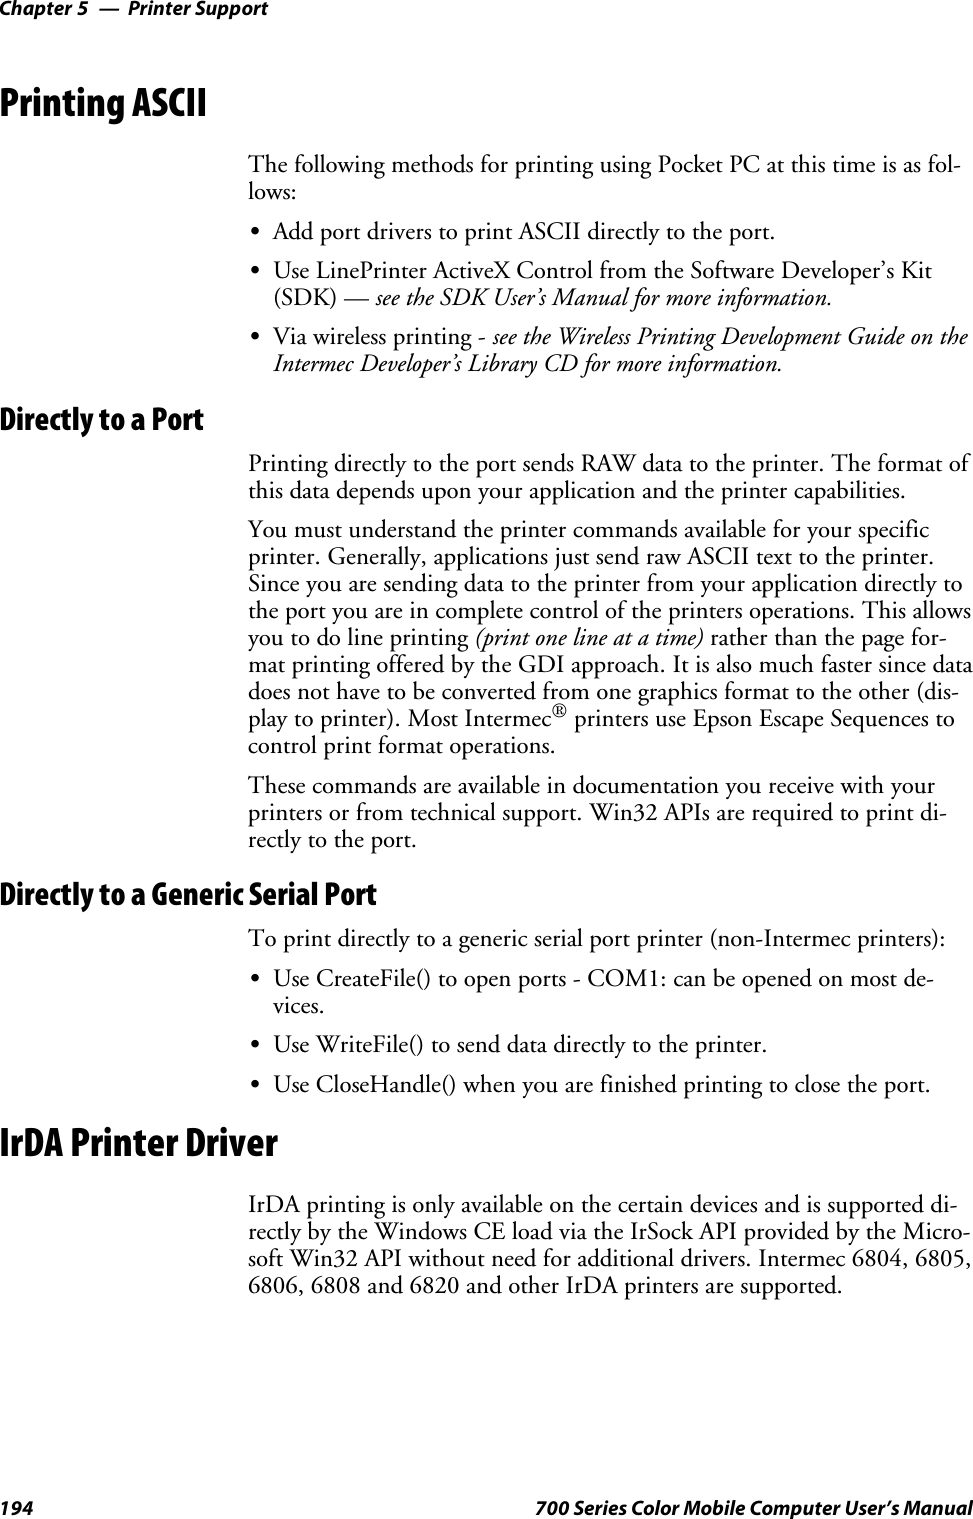 Printer SupportChapter —5194 700 Series Color Mobile Computer User’s ManualPrinting ASCIIThe following methods for printing using Pocket PC at this time is as fol-lows:SAdd port drivers to print ASCII directly to the port.SUse LinePrinter ActiveX Control from the Software Developer’s Kit(SDK) — see the SDK User’s Manual for more information.SVia wireless printing - see the Wireless Printing Development Guide on theIntermec Developer’s Library CD for more information.Directly to a PortPrinting directly to the port sends RAW data to the printer. The format ofthis data depends upon your application and the printer capabilities.Youmustunderstandtheprintercommandsavailableforyourspecificprinter. Generally, applications just send raw ASCII text to the printer.Since you are sending data to the printer from your application directly tothe port you are in complete control of the printers operations. This allowsyoutodolineprinting(printonelineatatime)rather than the page for-mat printing offered by the GDI approach. It is also much faster since datadoes not have to be converted from one graphics format to the other (dis-play to printer). Most Intermec®printers use Epson Escape Sequences tocontrol print format operations.These commands are available in documentation you receive with yourprinters or from technical support. Win32 APIs are required to print di-rectly to the port.Directly to a Generic Serial PortTo print directly to a generic serial port printer (non-Intermec printers):SUseCreateFile()toopenports-COM1:canbeopenedonmostde-vices.SUse WriteFile() to send data directly to the printer.SUse CloseHandle() when you are finished printing to close the port.IrDA Printer DriverIrDA printing is only available on the certain devices and is supported di-rectly by the Windows CE load via the IrSock API provided by the Micro-soft Win32 API without need for additional drivers. Intermec 6804, 6805,6806, 6808 and 6820 and other IrDA printers are supported.